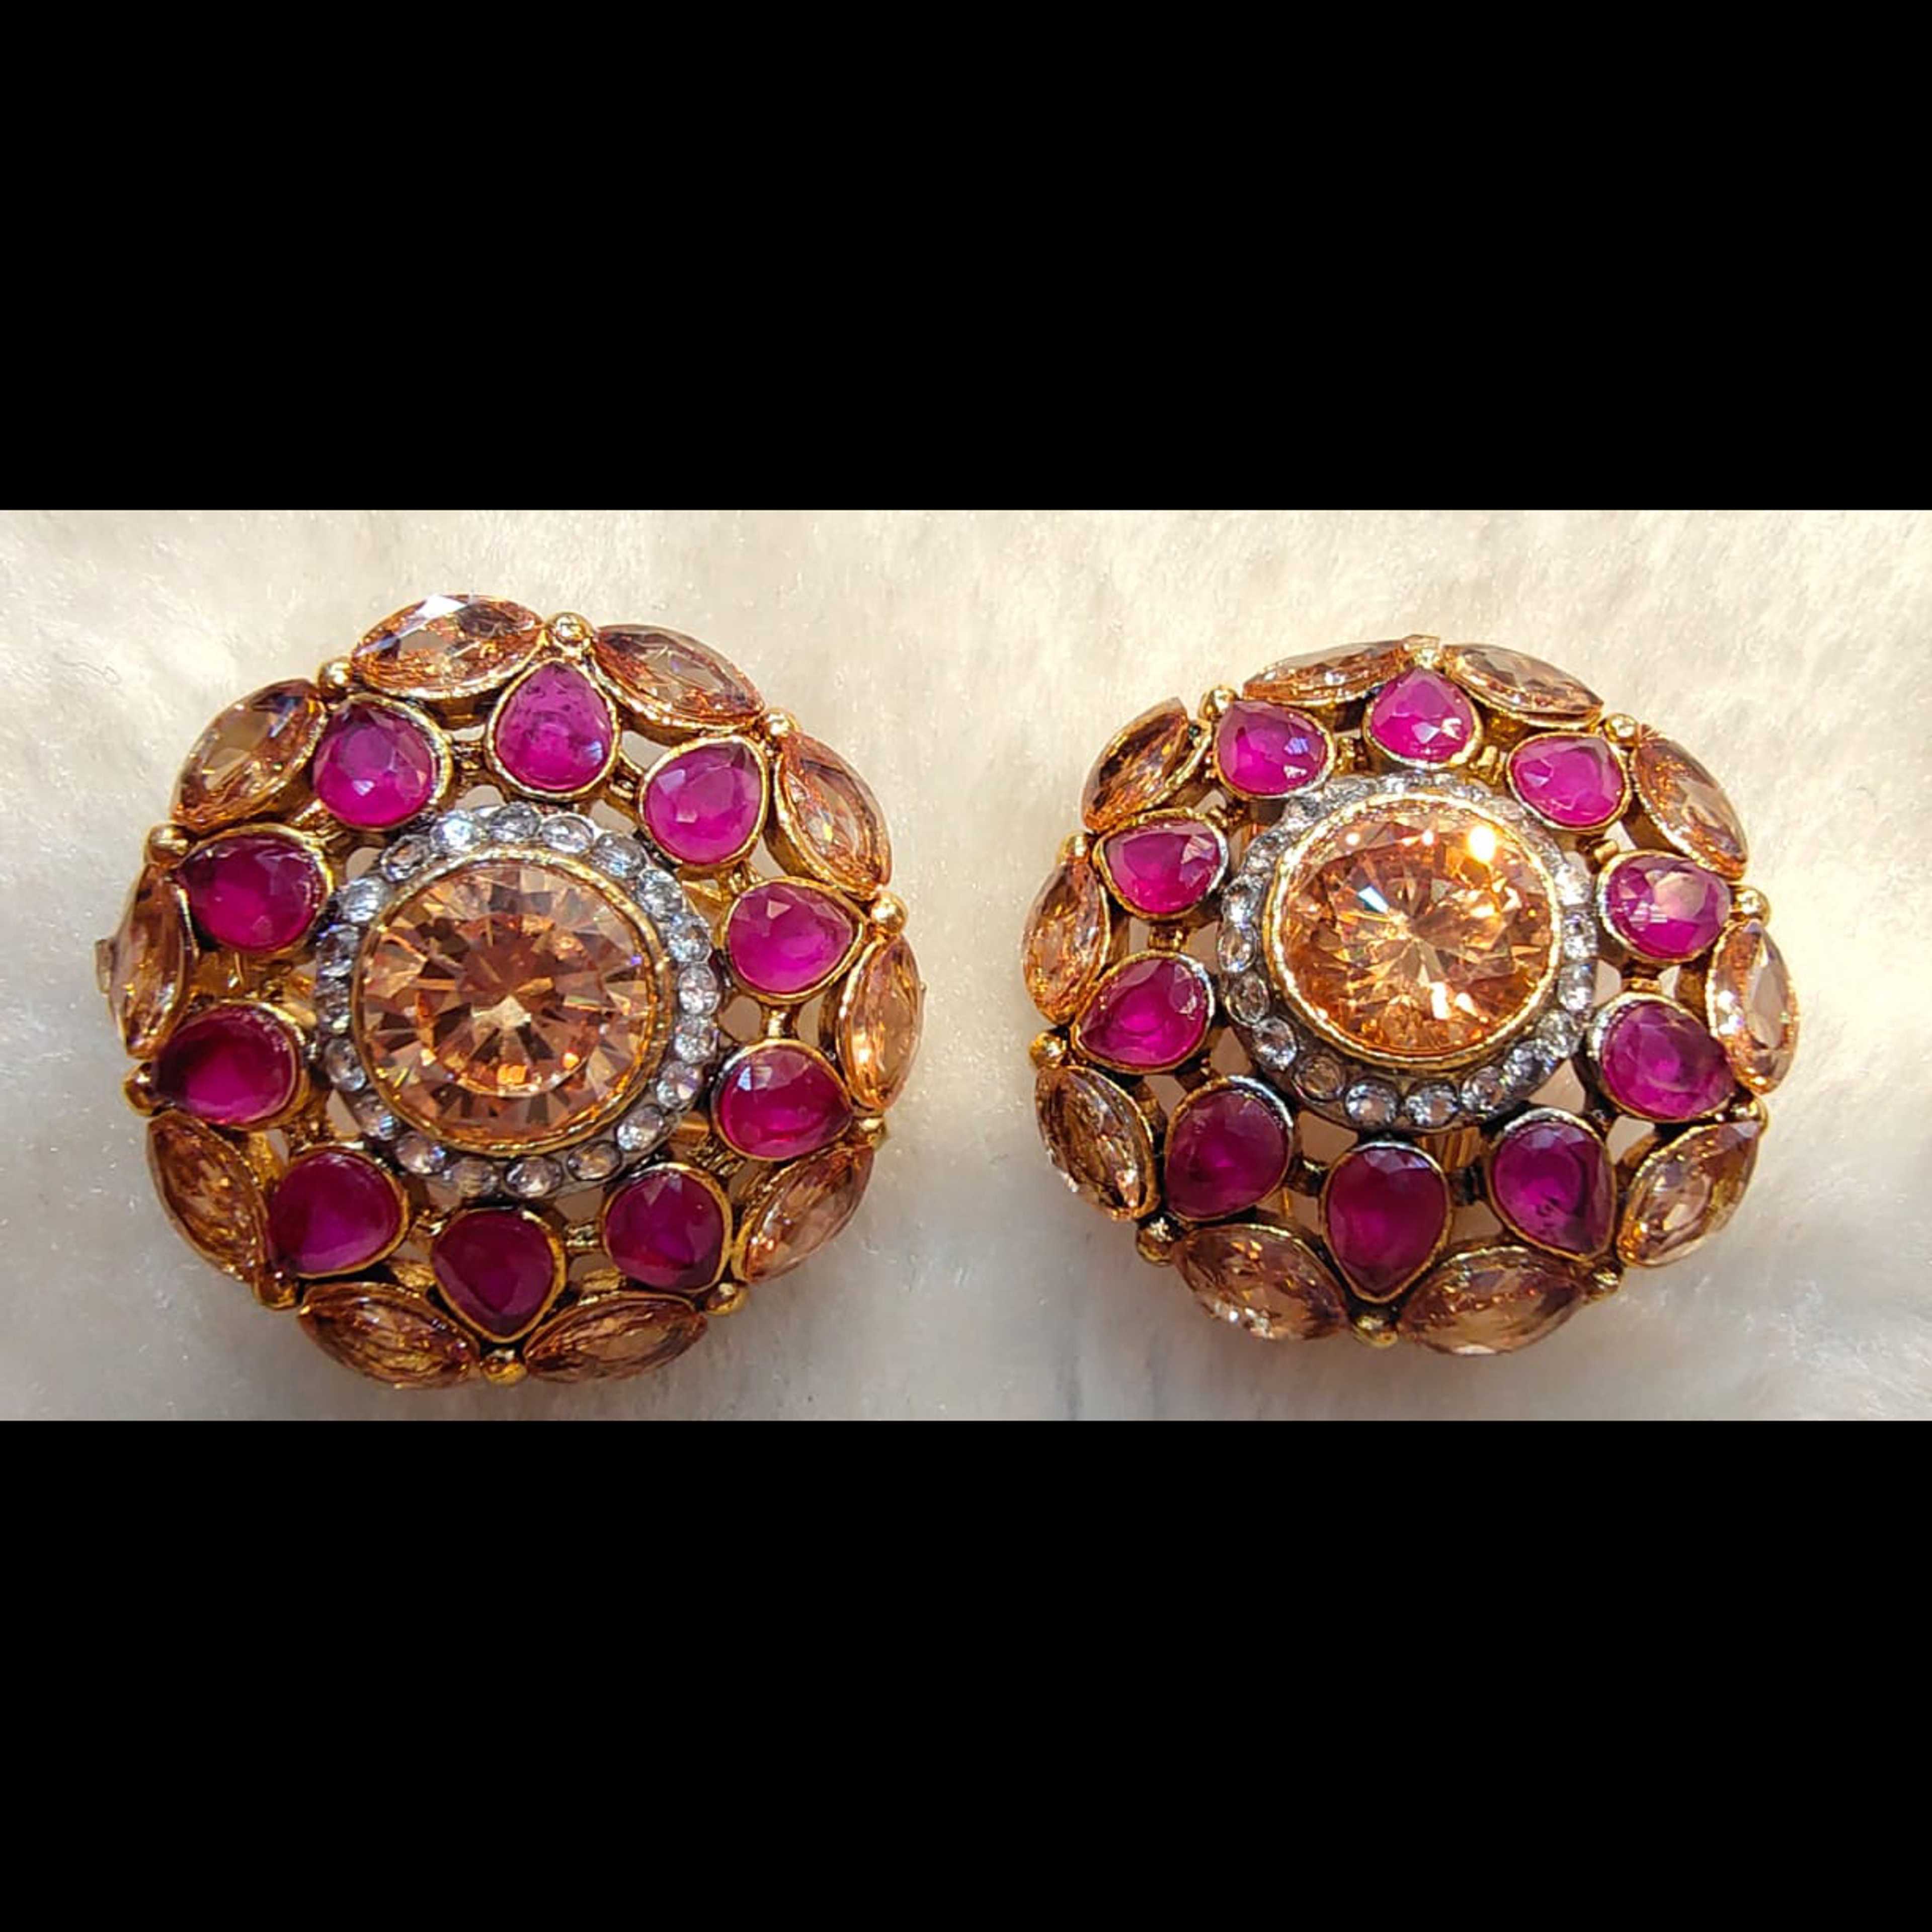 Champagne Color and Red Ruby stones Goldplated - Rs. 690